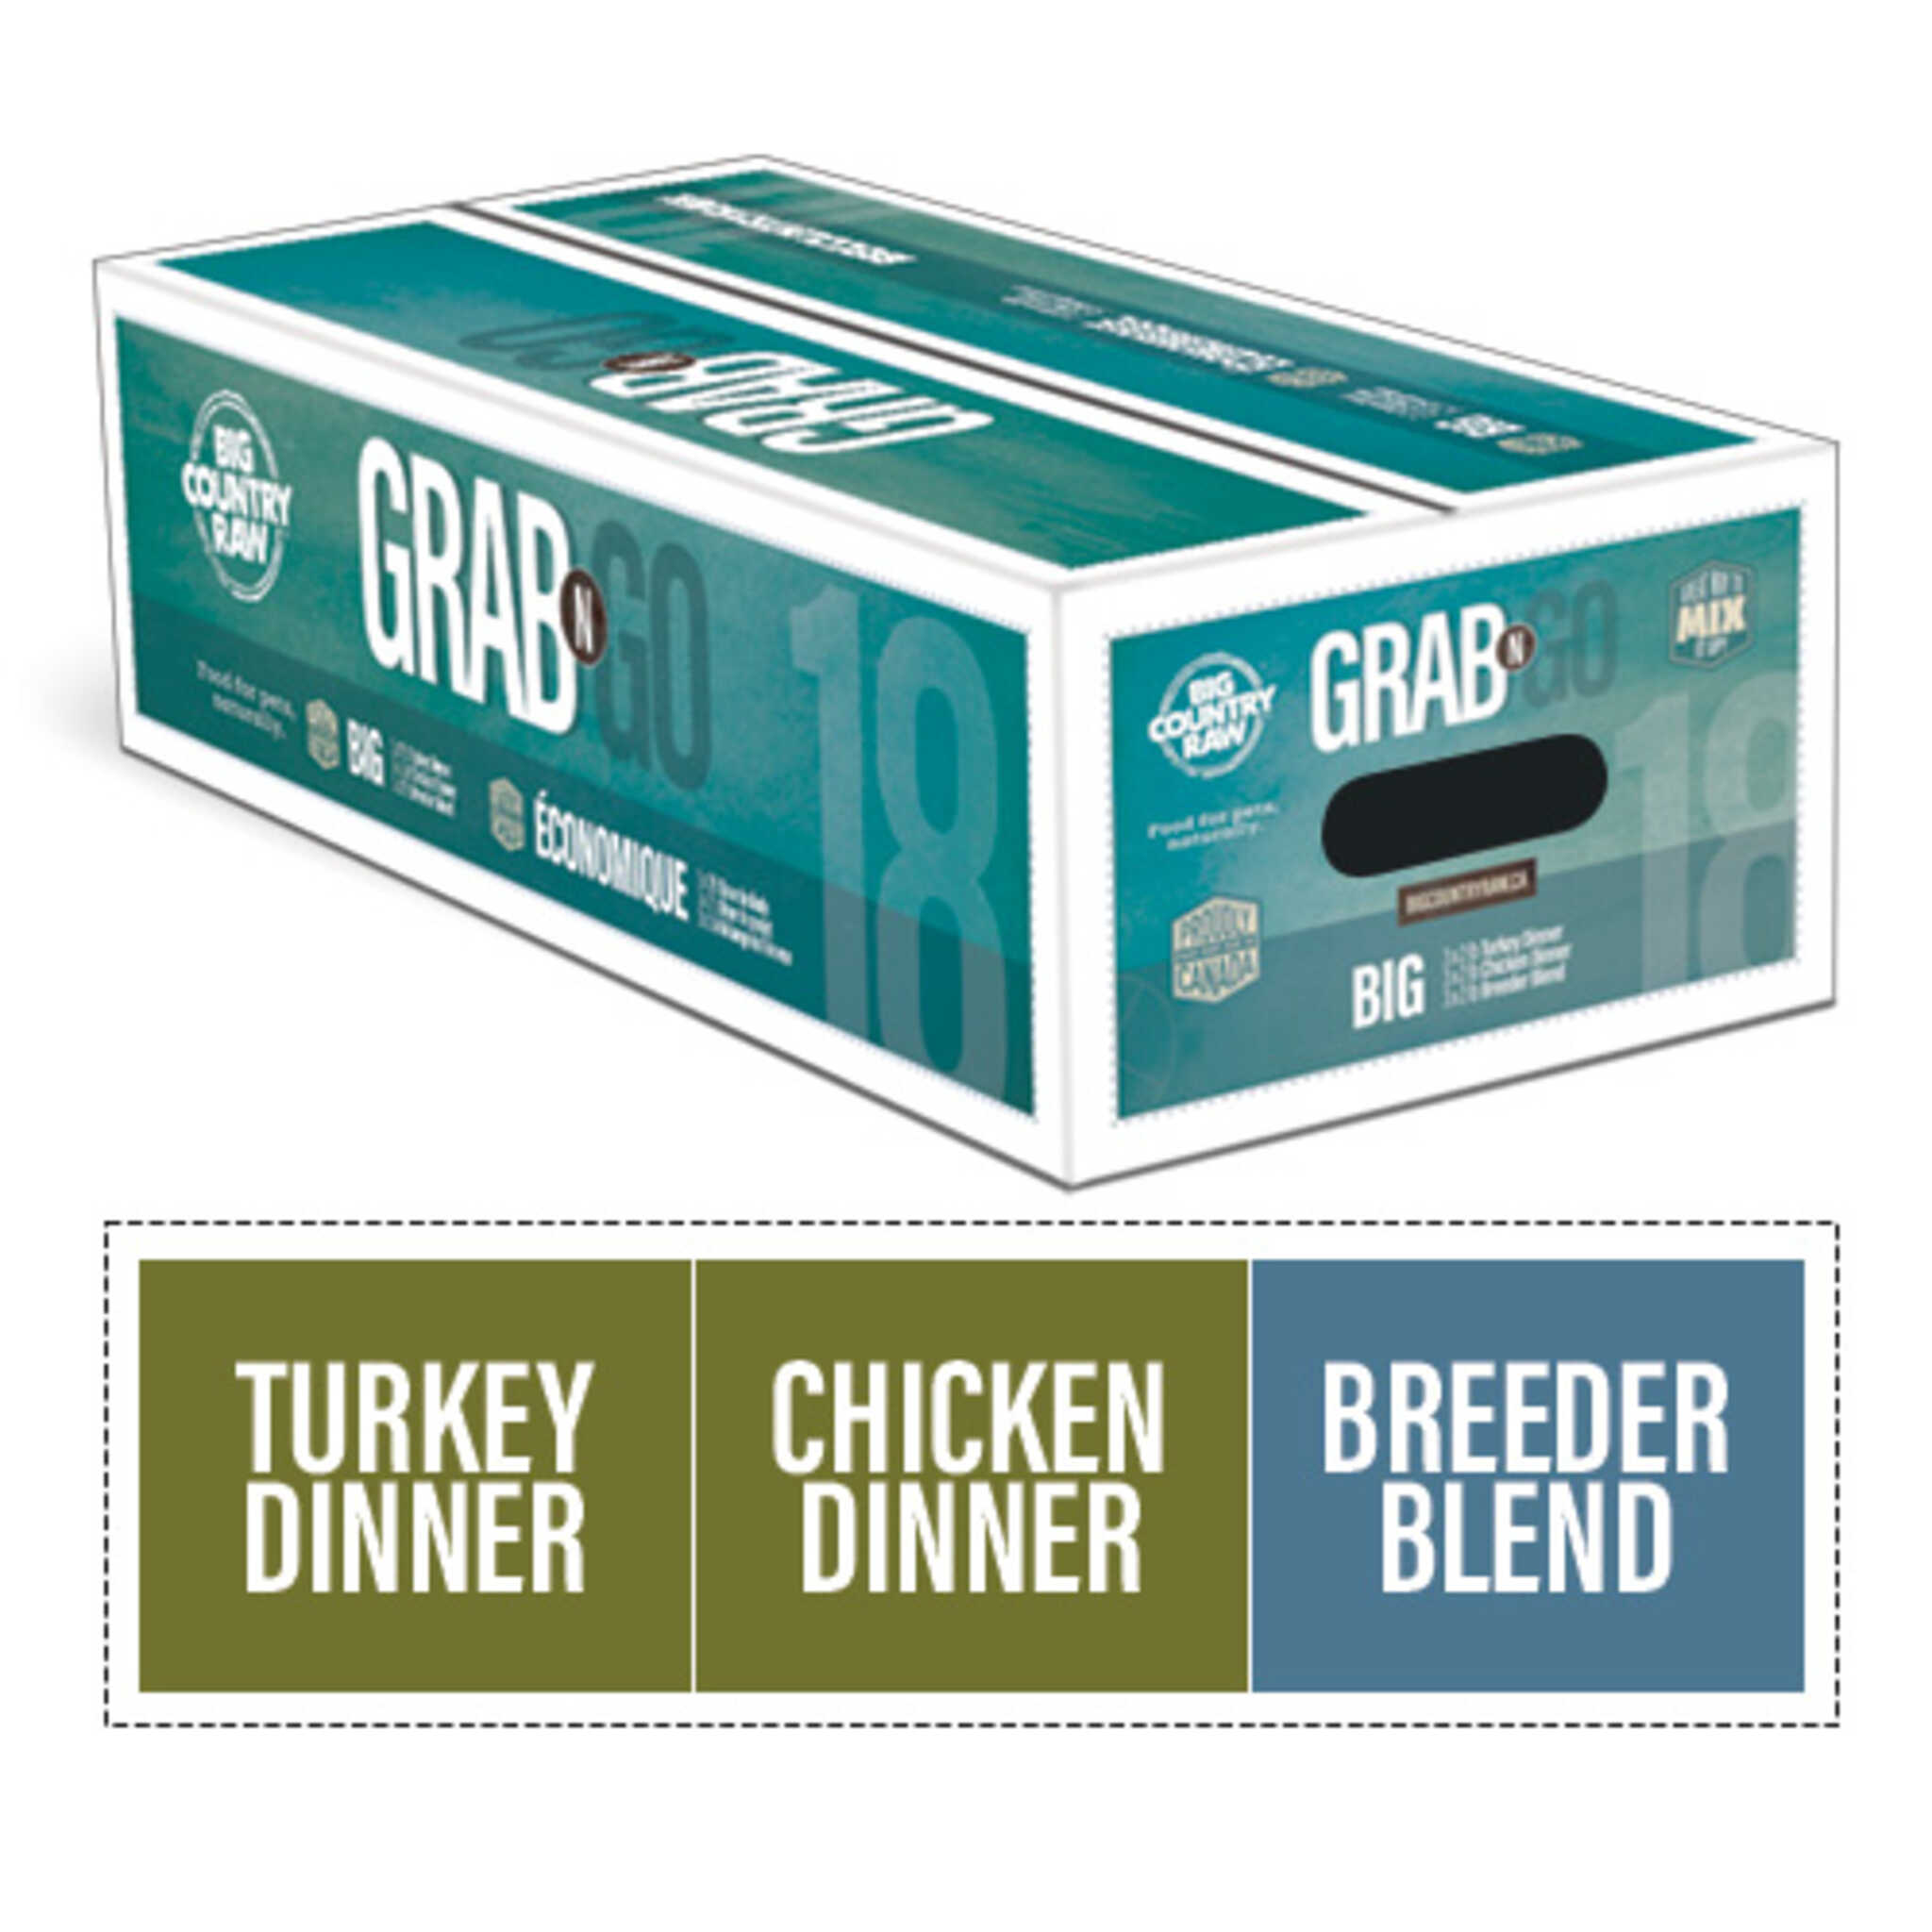 A box of Big Country Raw Grab & Go Big 18, bulk dog food, contains 3 recipes: turkey dinner, chicken dinner, breeder blend, 18 lb (contains nine 2 lb containers), requires freezing.